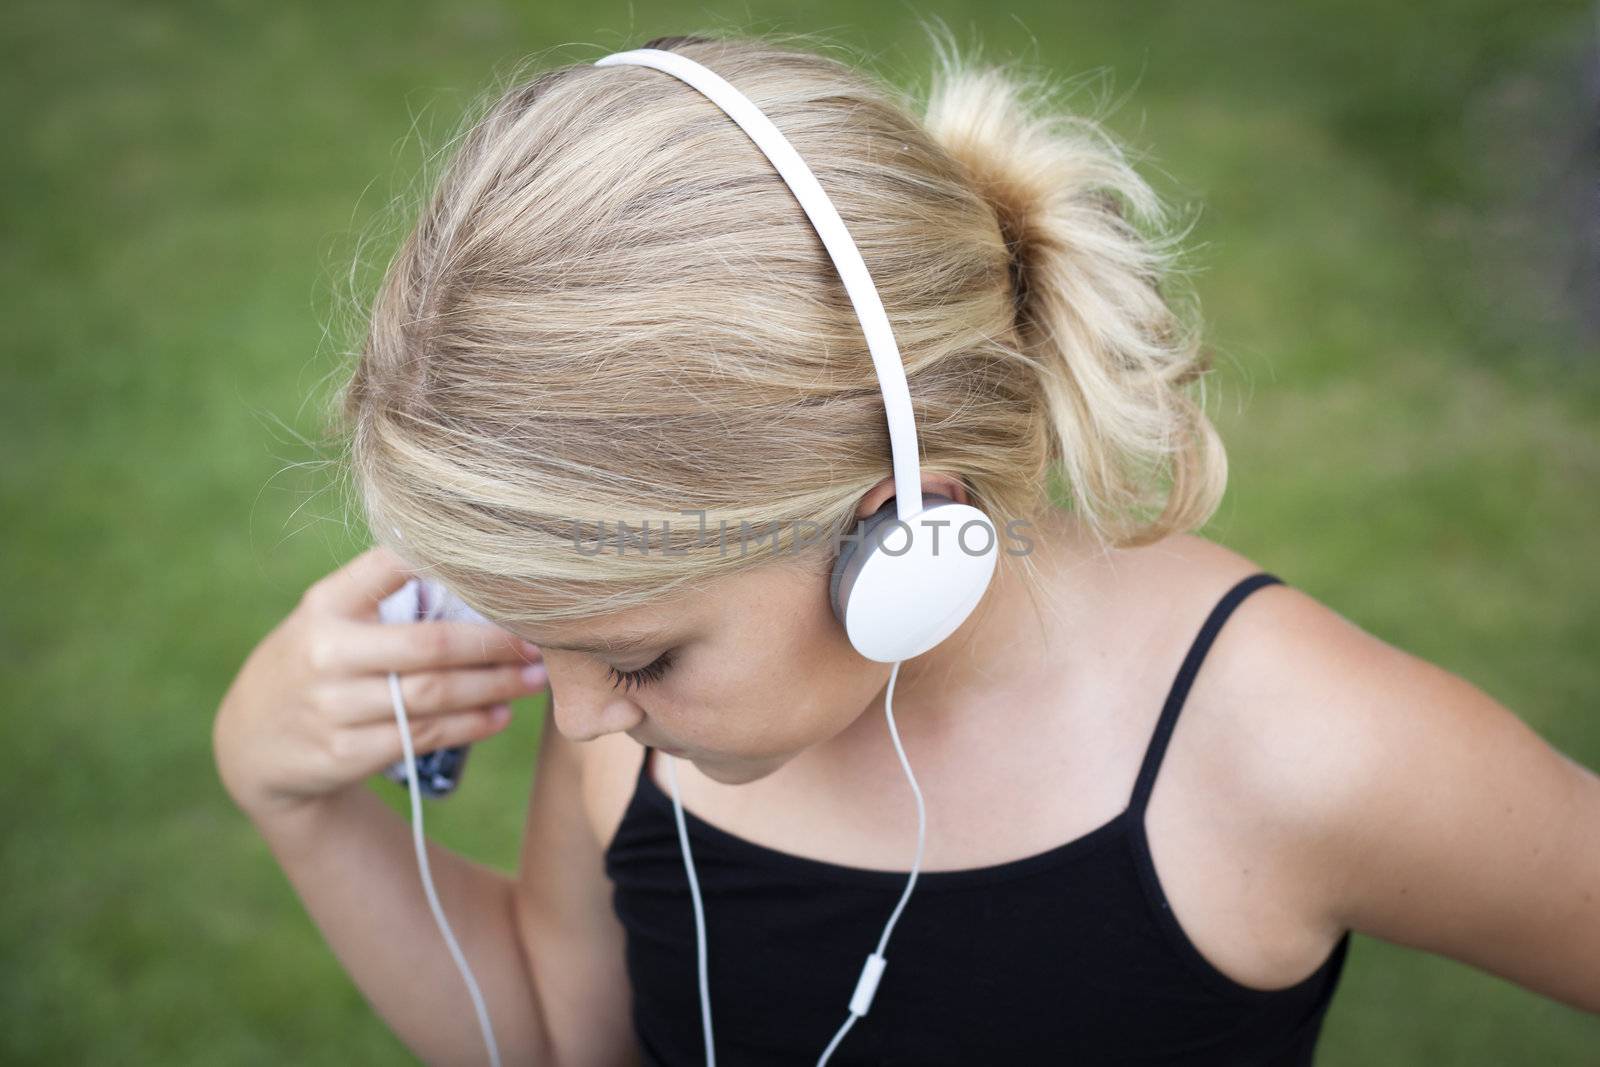 Girl listening to musci by annems